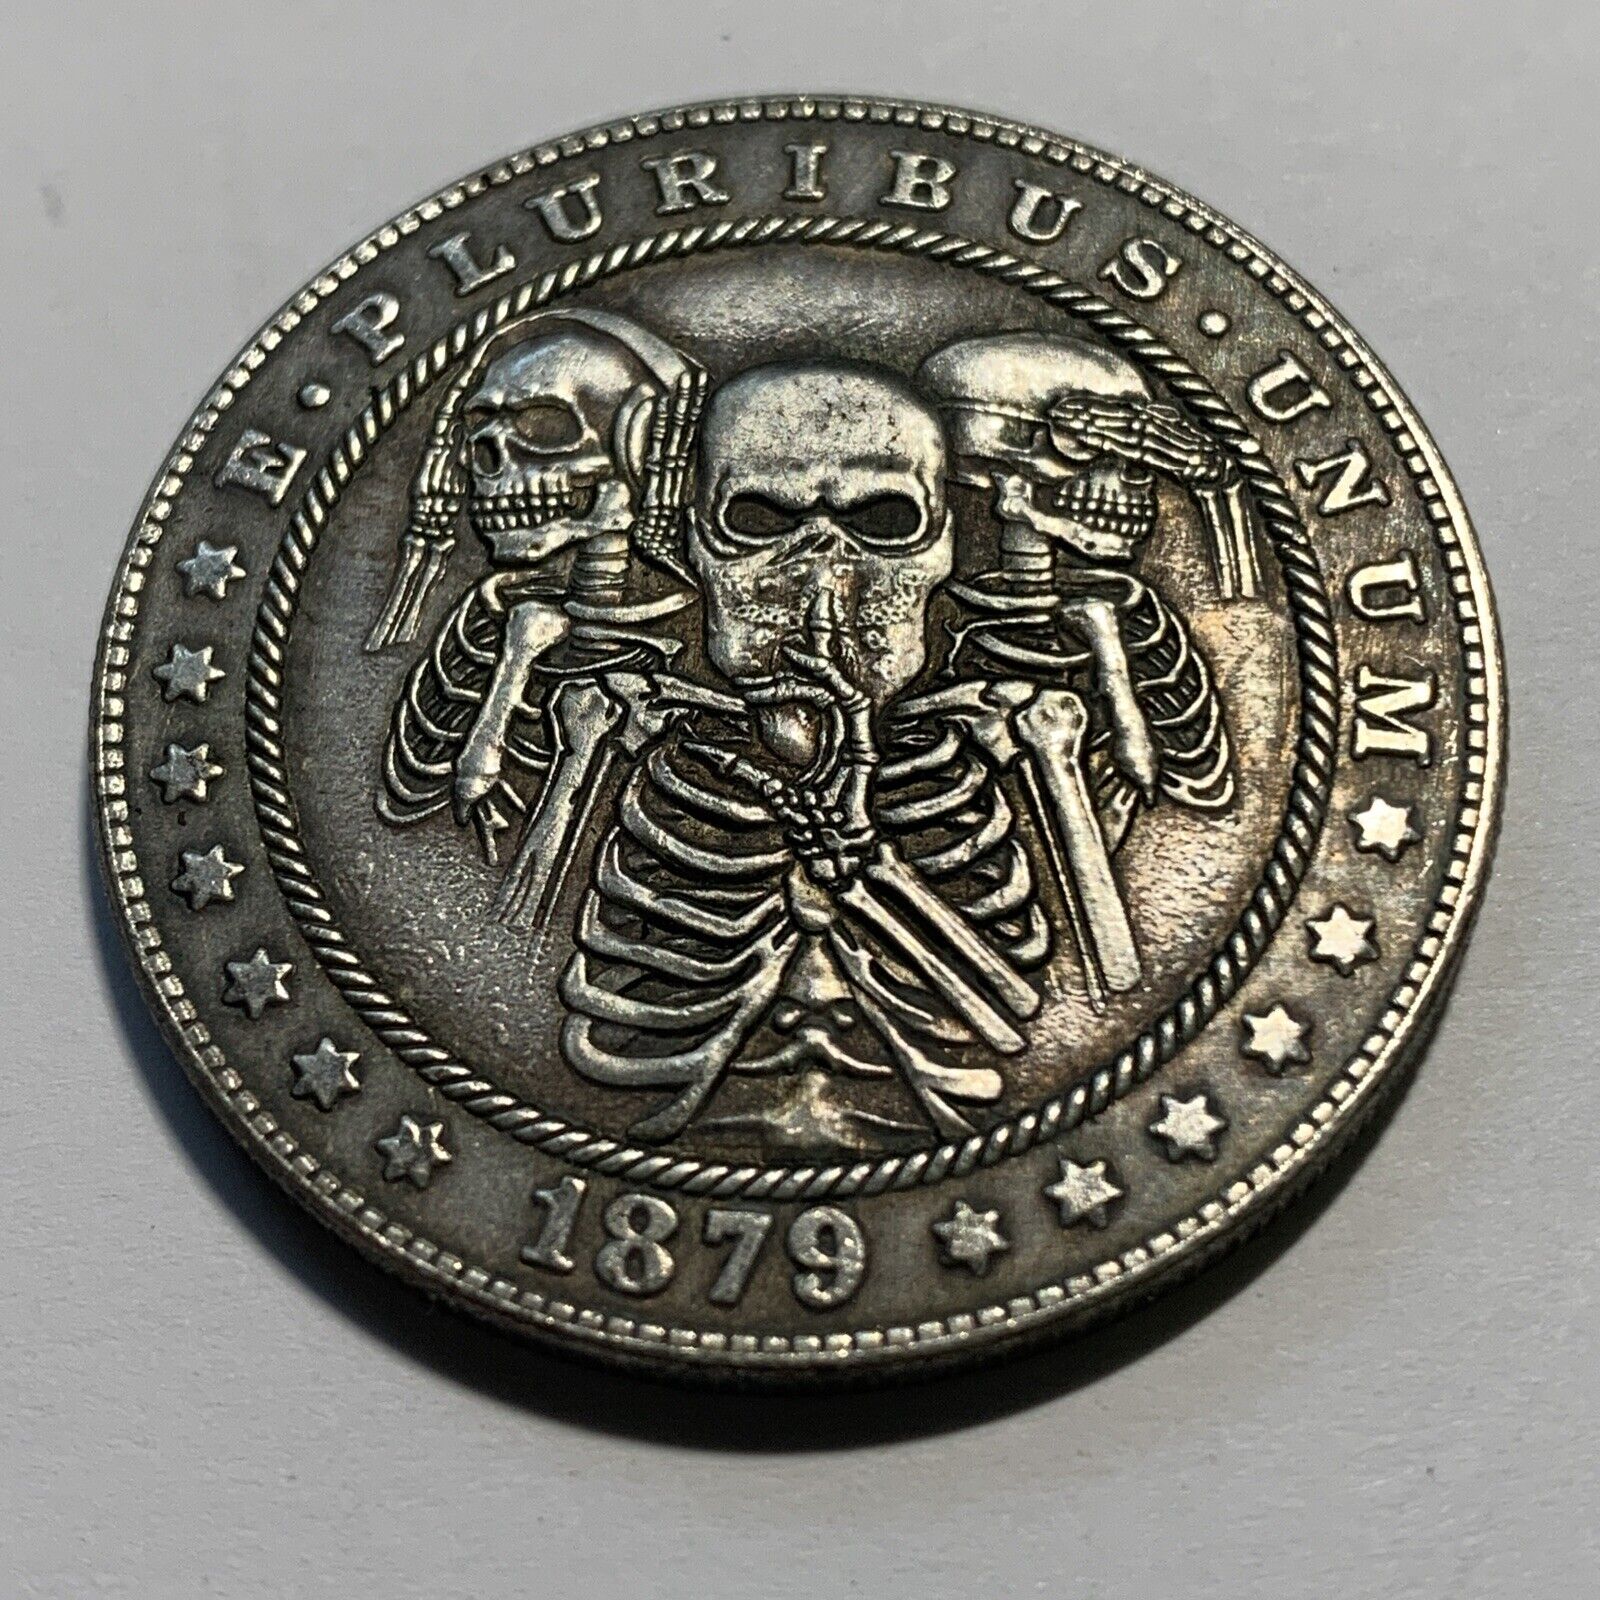 NEW Skull Skeleton See-Hear-Do No Evil Lucky Heads Tails Challenge Coin